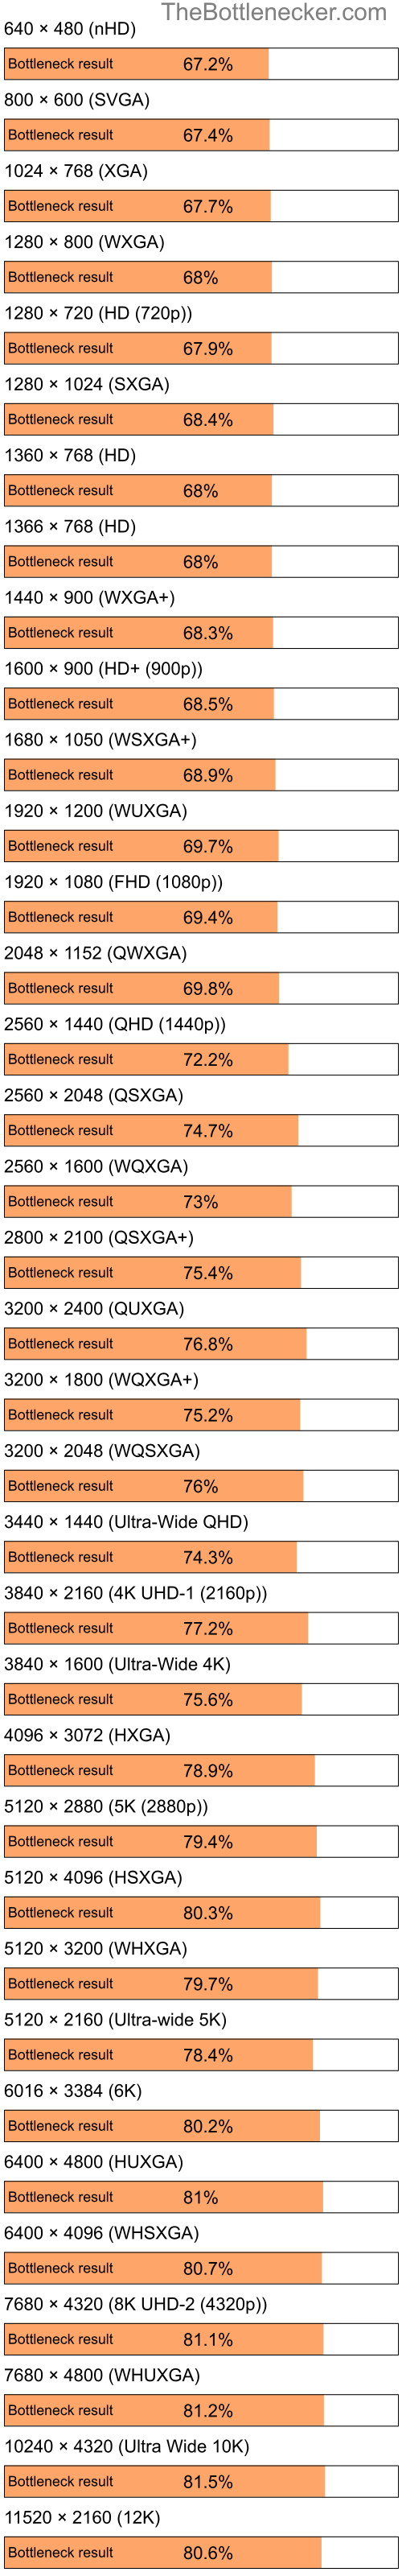 Bottleneck results by resolution for Intel Atom Z520 and NVIDIA Quadro NVS 150M in General Tasks